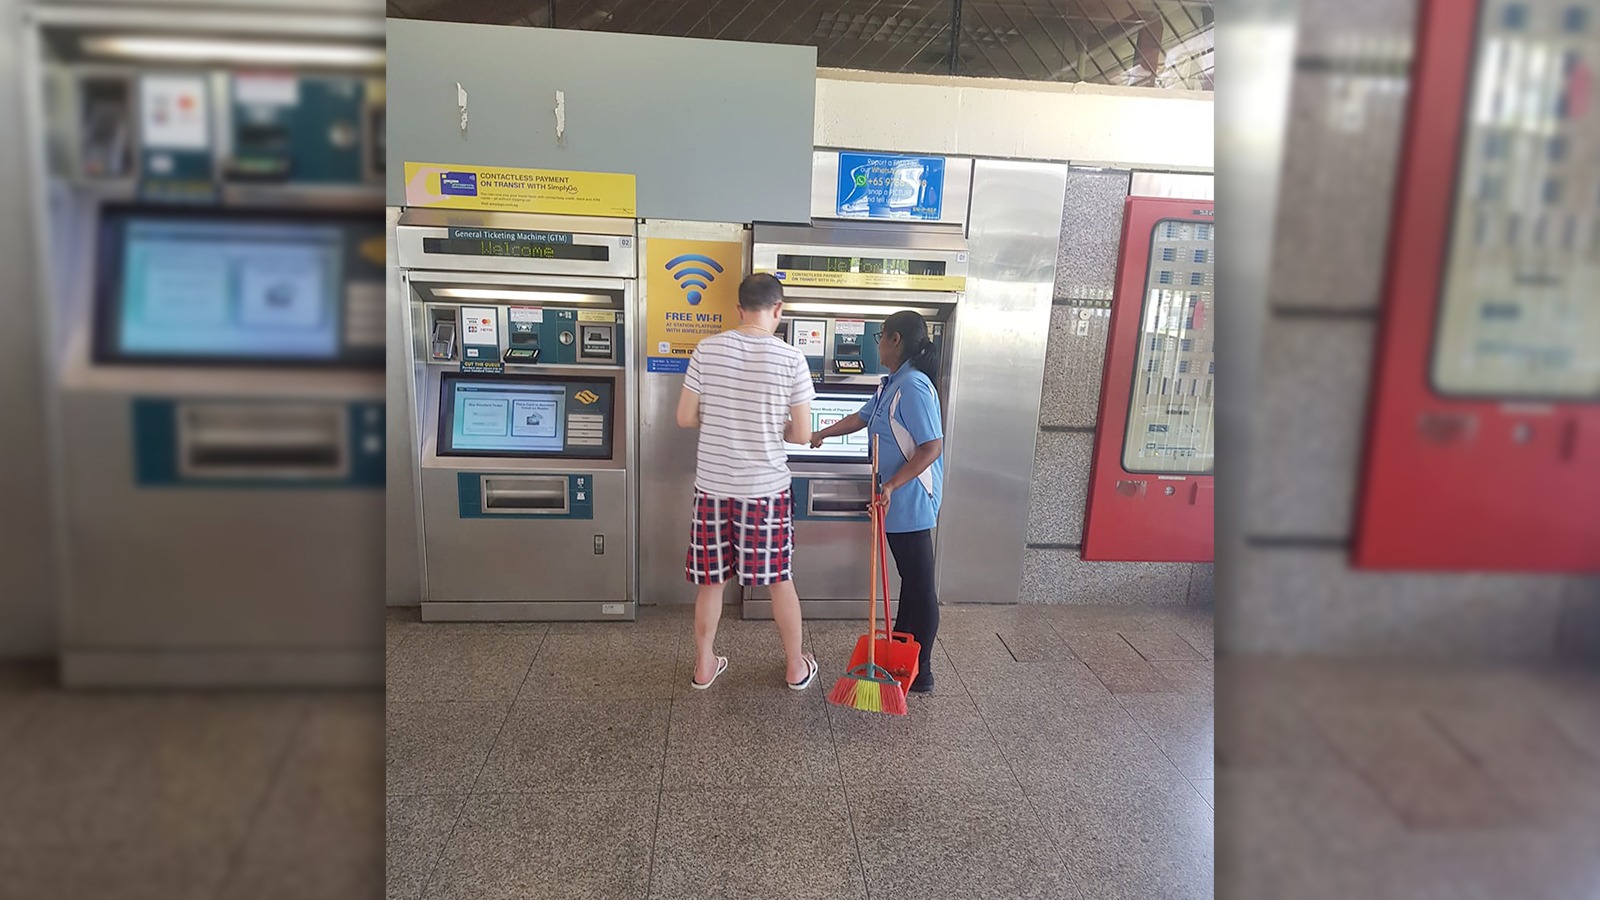 MRT station cleaner patiently helps agitated foreigner